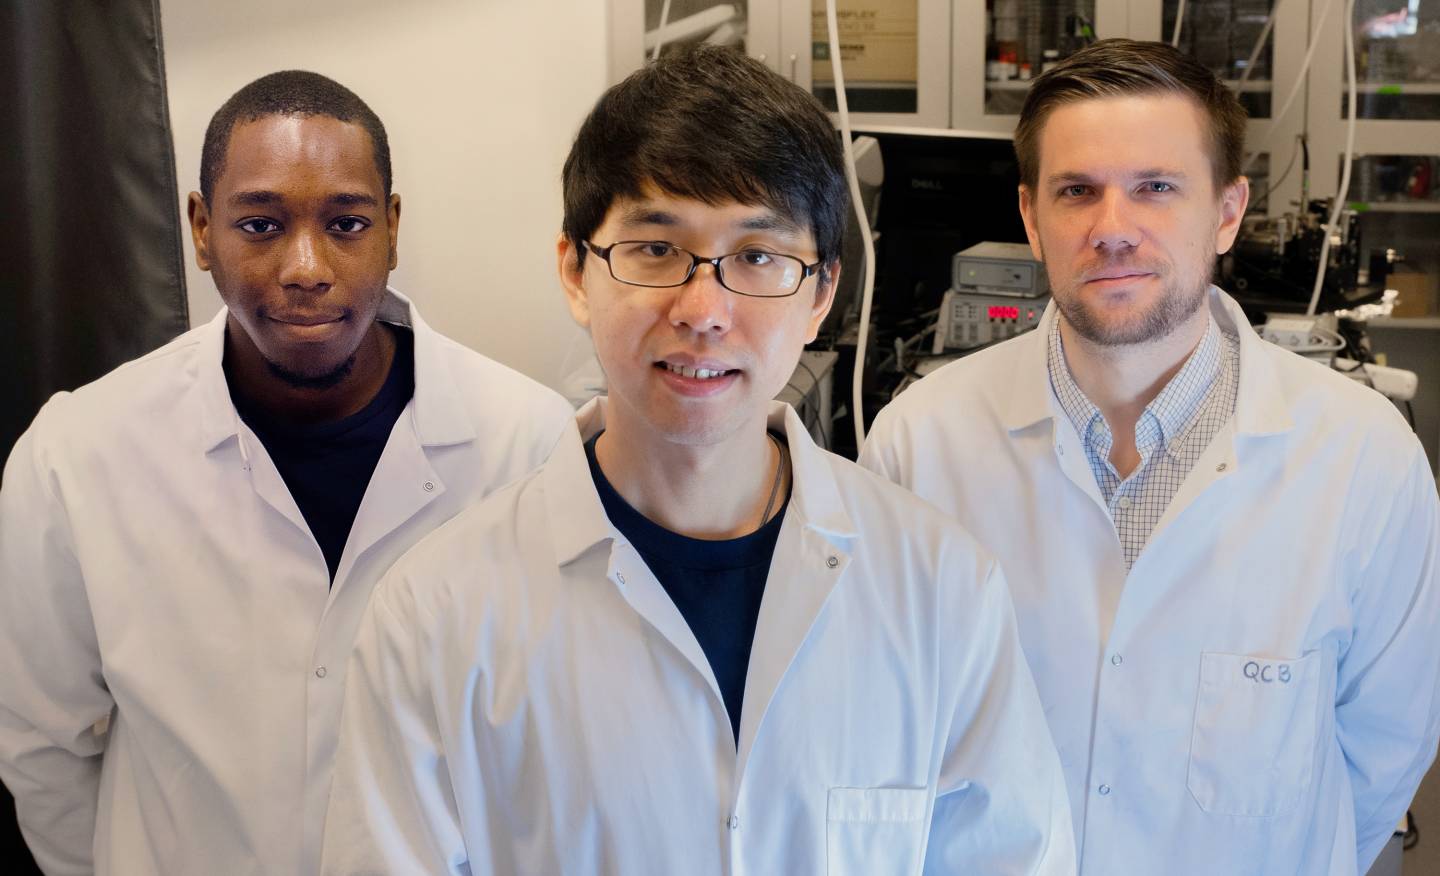 Xiaoming Zhao (center), Rudolph Holley, III (left), and Quinn Burlingame (right)